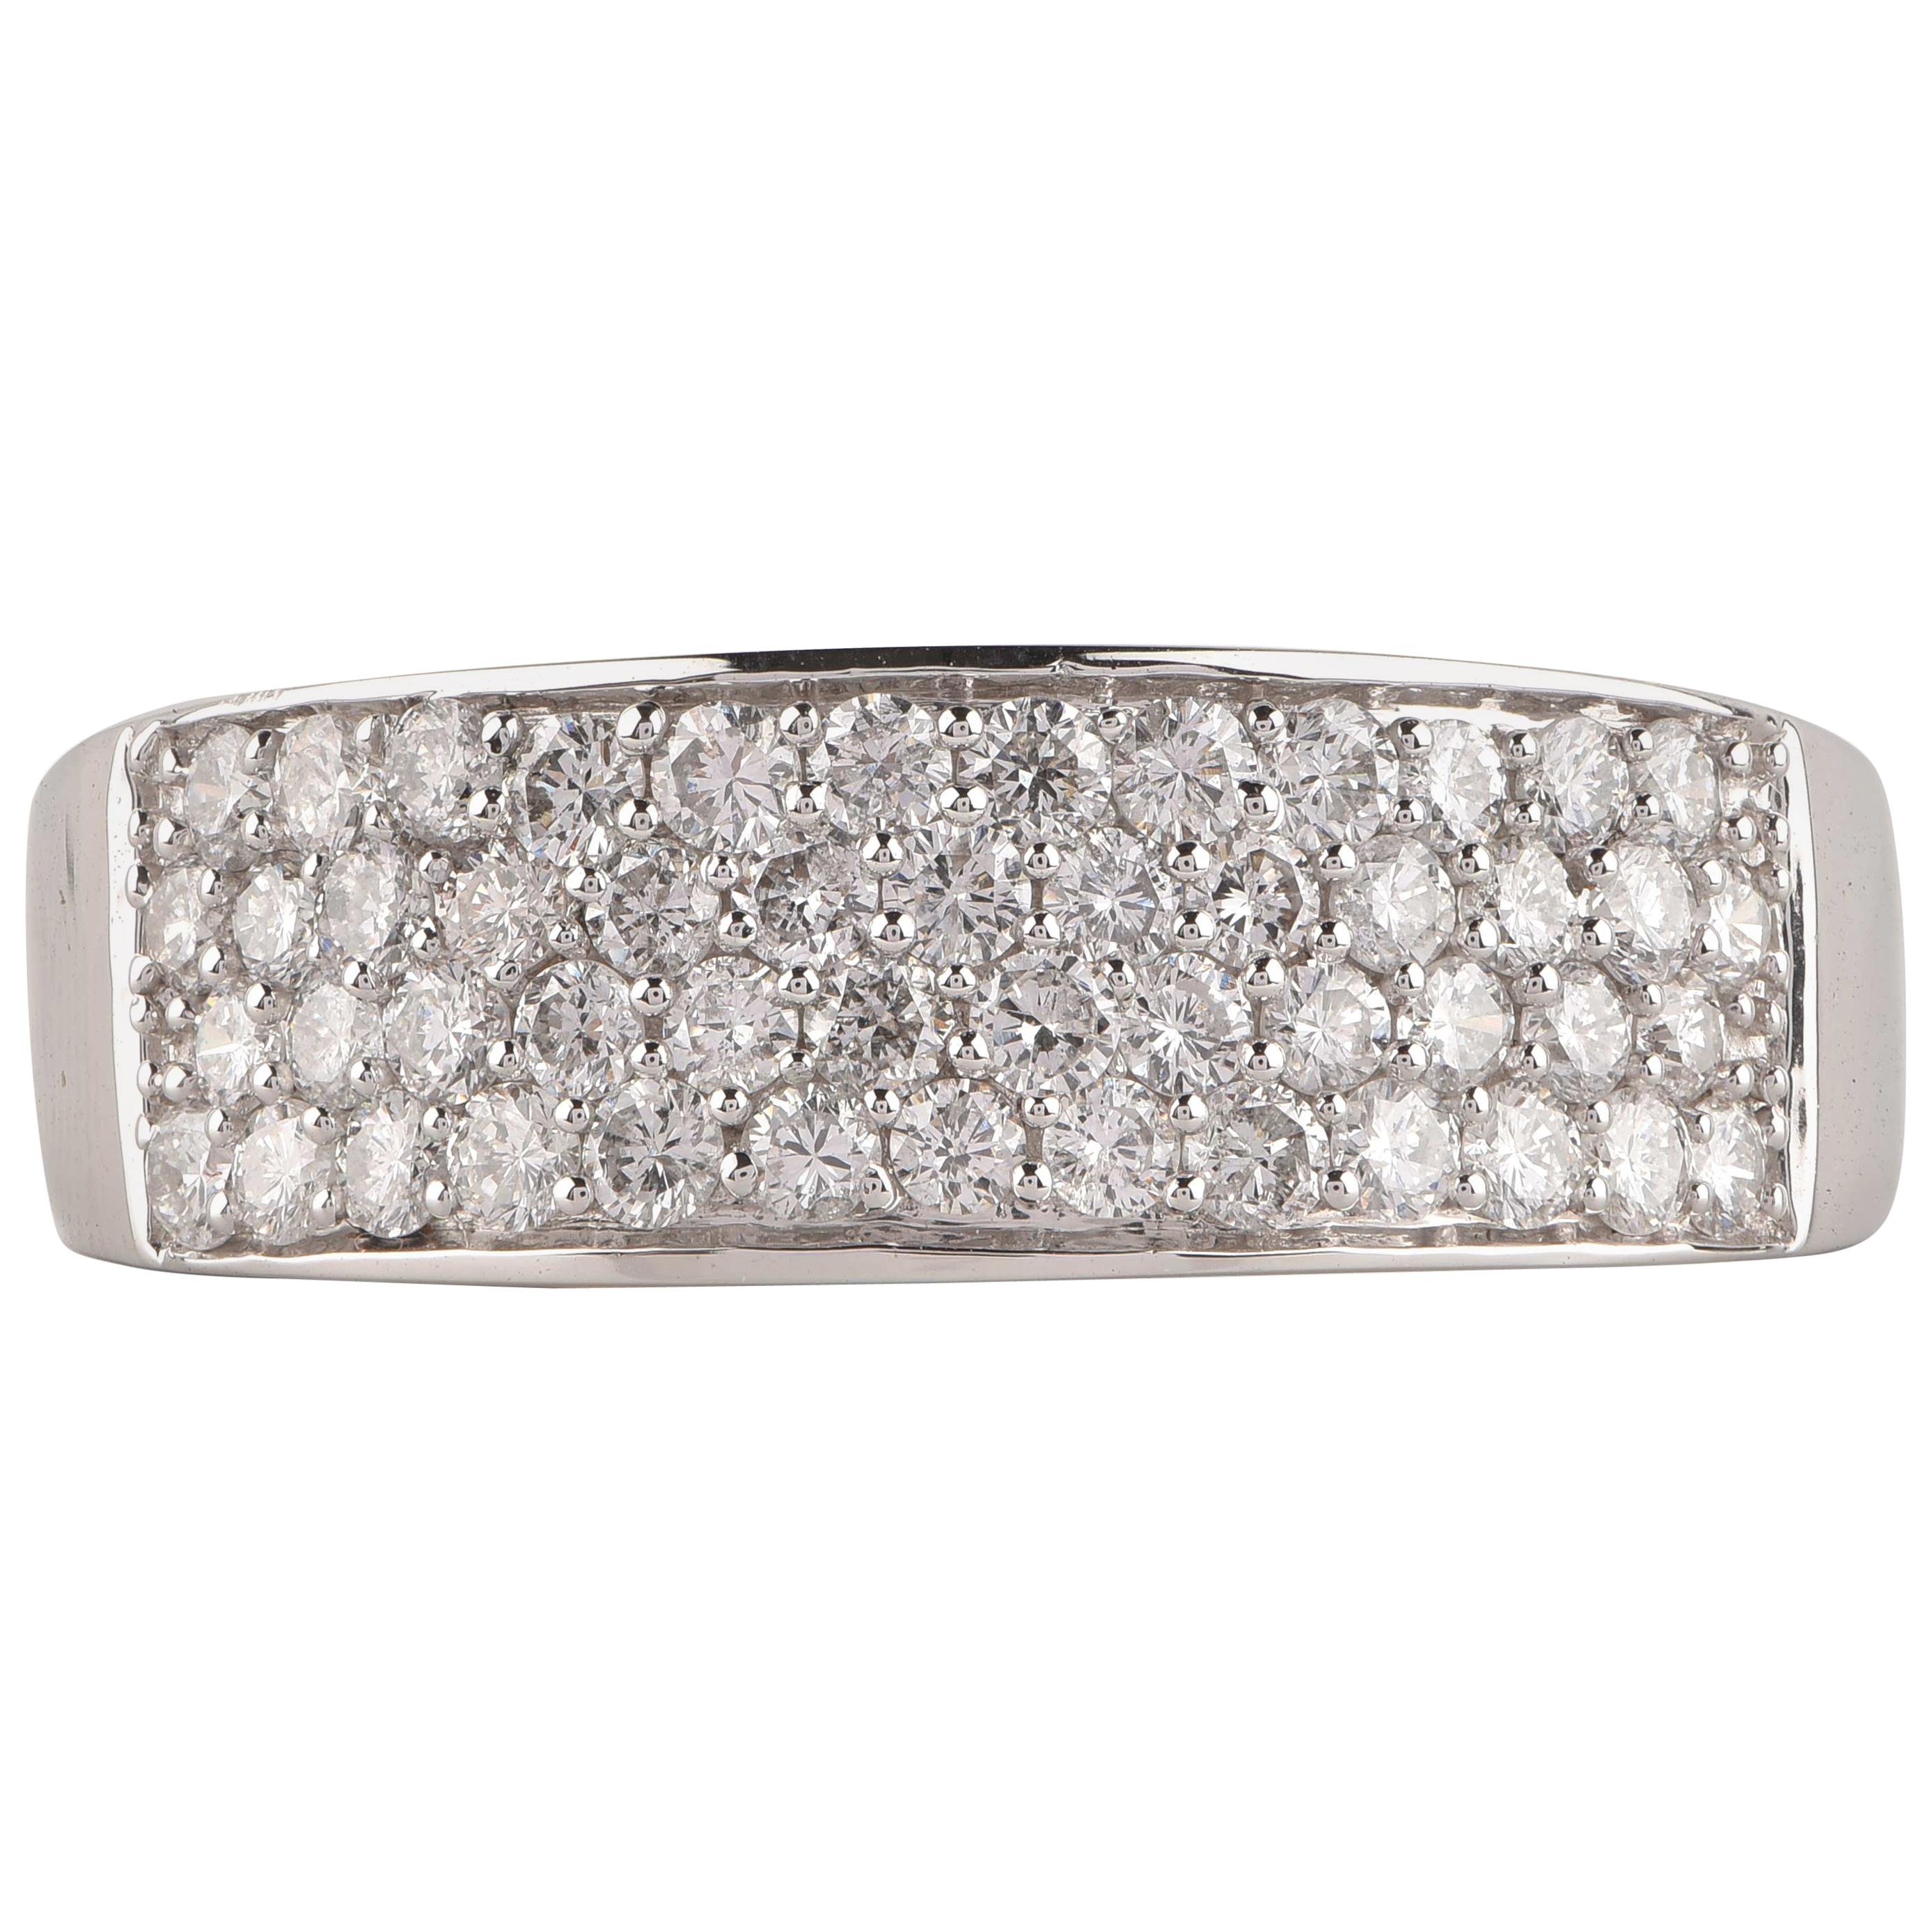 The anniversary ring shines brightly with 50 brilliant-cut diamond set in micro-pave setting and elegantly crafted in 18-karat white gold. The diamonds are graded H-I Color, I2 Clarity. 

Metal color and ring size can be customized on request.